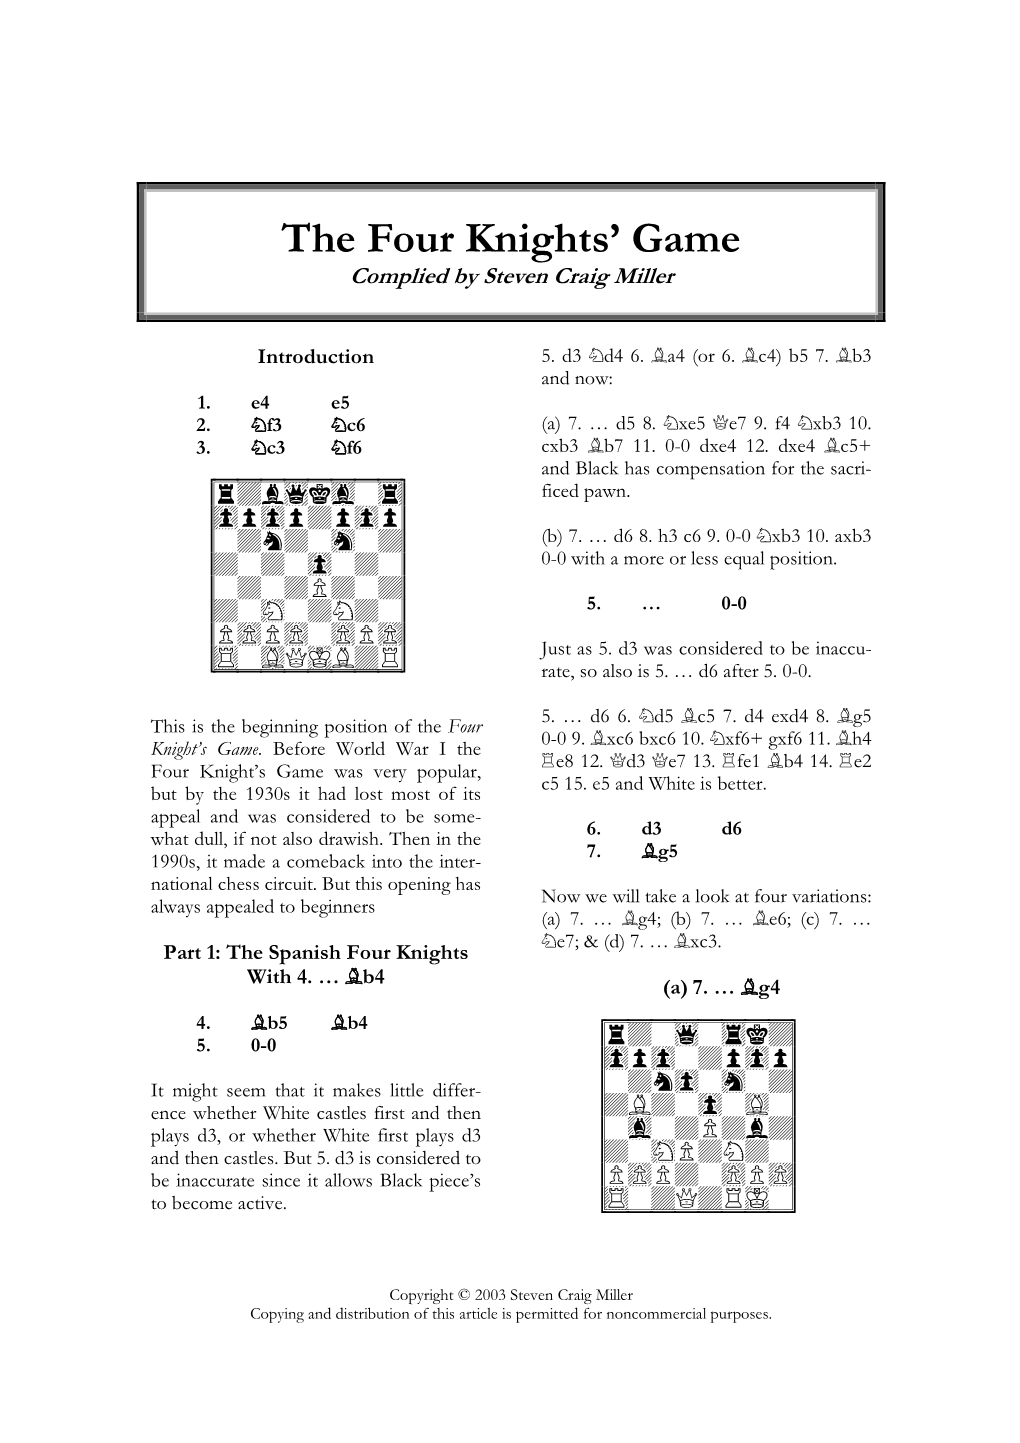 The Four Knights' Game